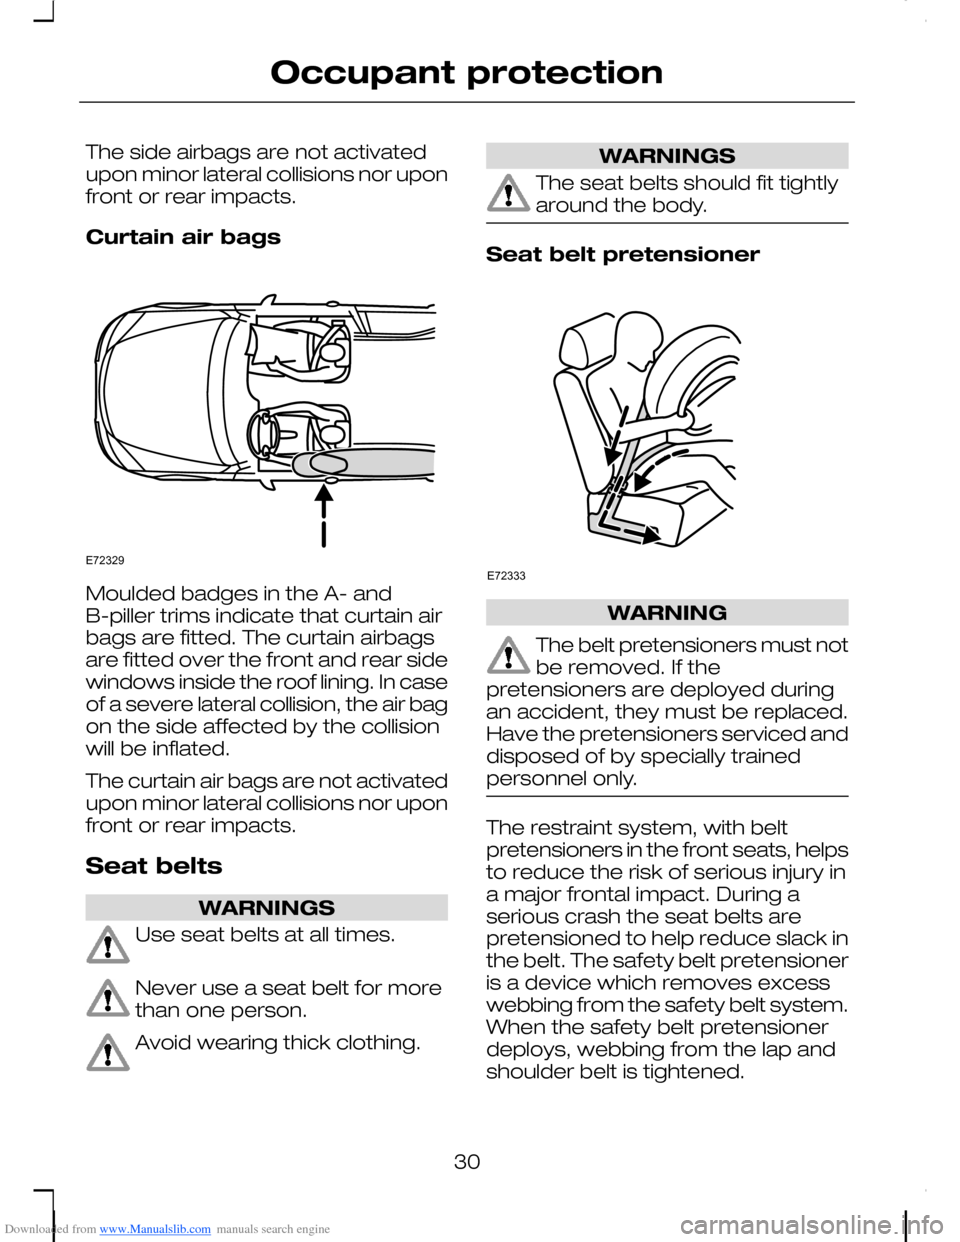 FORD C MAX 2008 1.G Owners Manual Downloaded from www.Manualslib.com manuals search engine The side airbags are not activatedupon minor lateral collisions nor uponfront or rear impacts.
Curtain air bags
Moulded badges in the A- andB-p